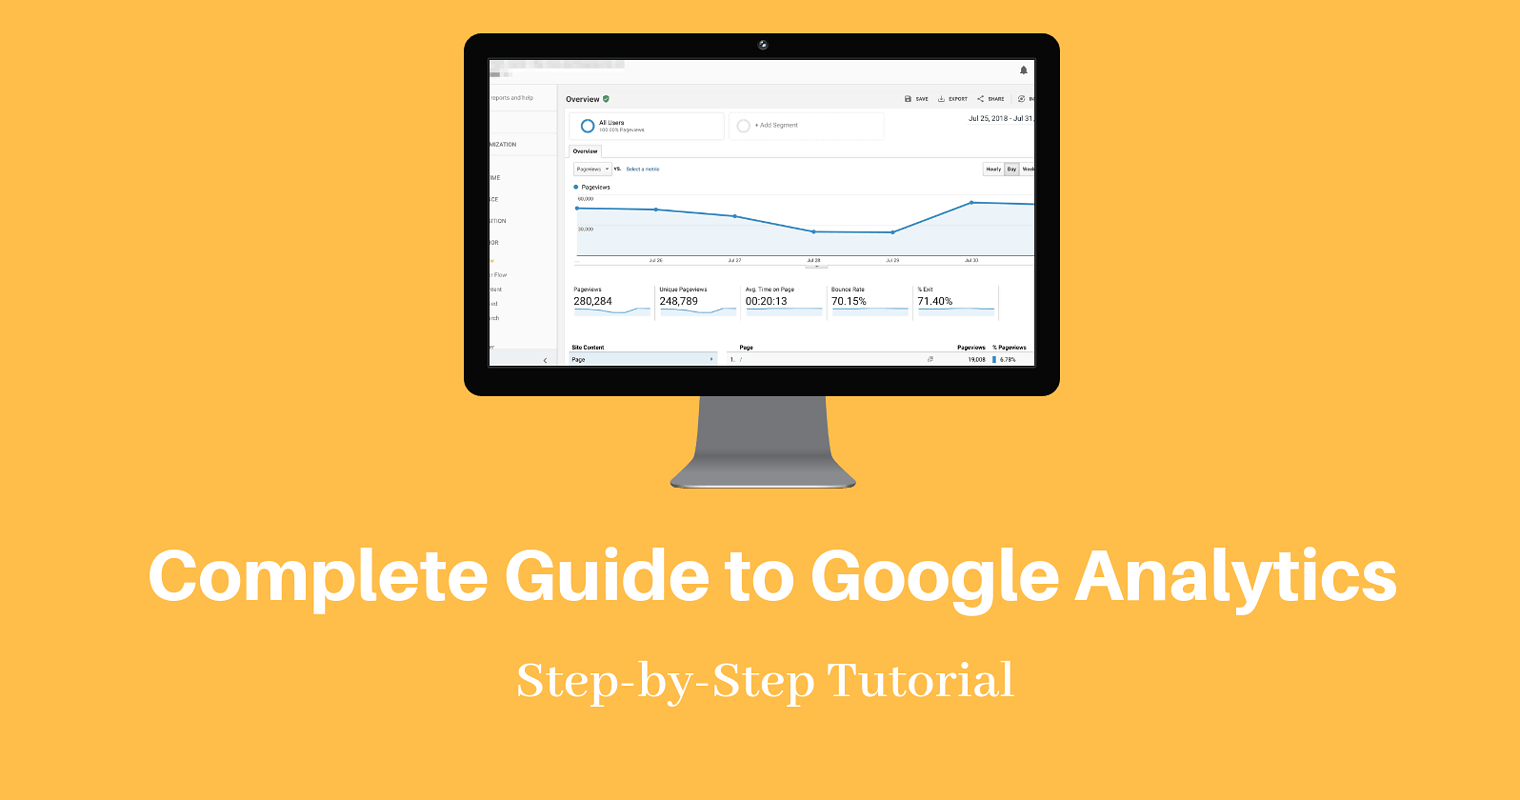 How to Use Google Analytics: A Complete Guide